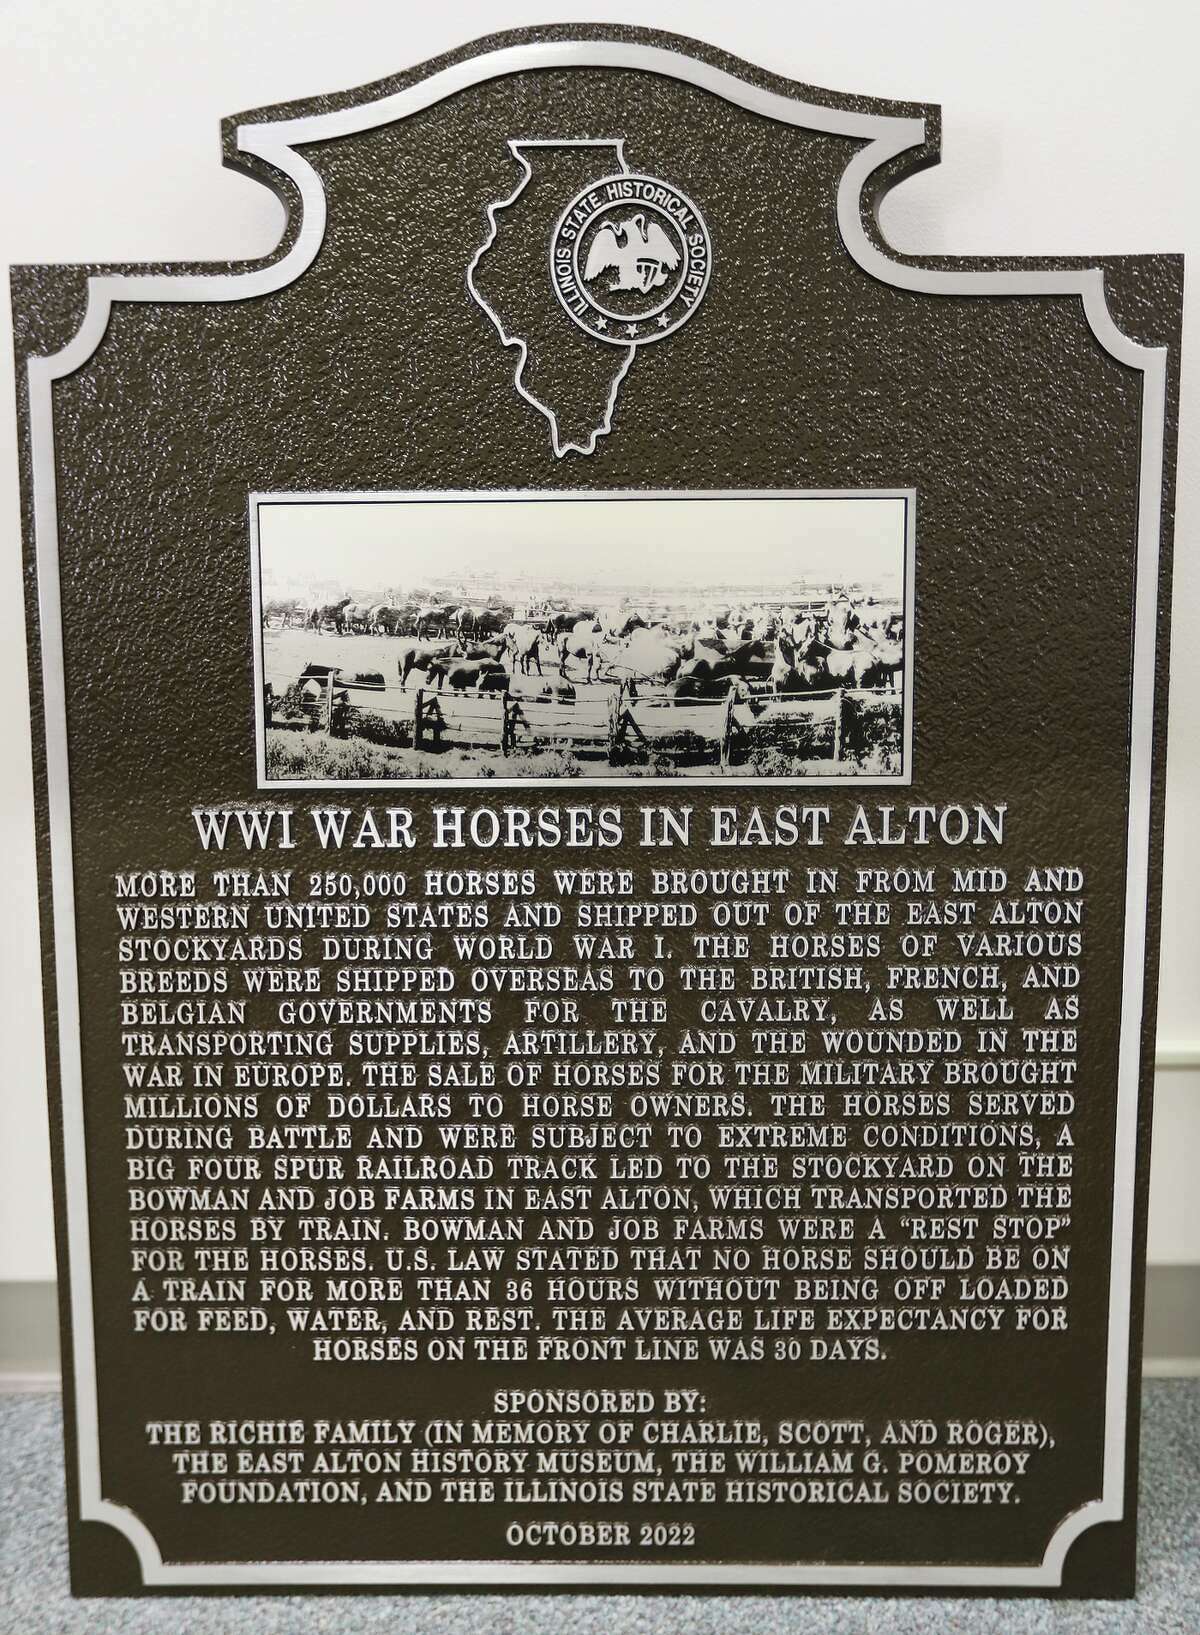 A historic marker placed in front of the East Alton Library on Nov. 5 ensures people will not forget the 250,000 horses that left the Riverbend for World War I fighting in Europe.